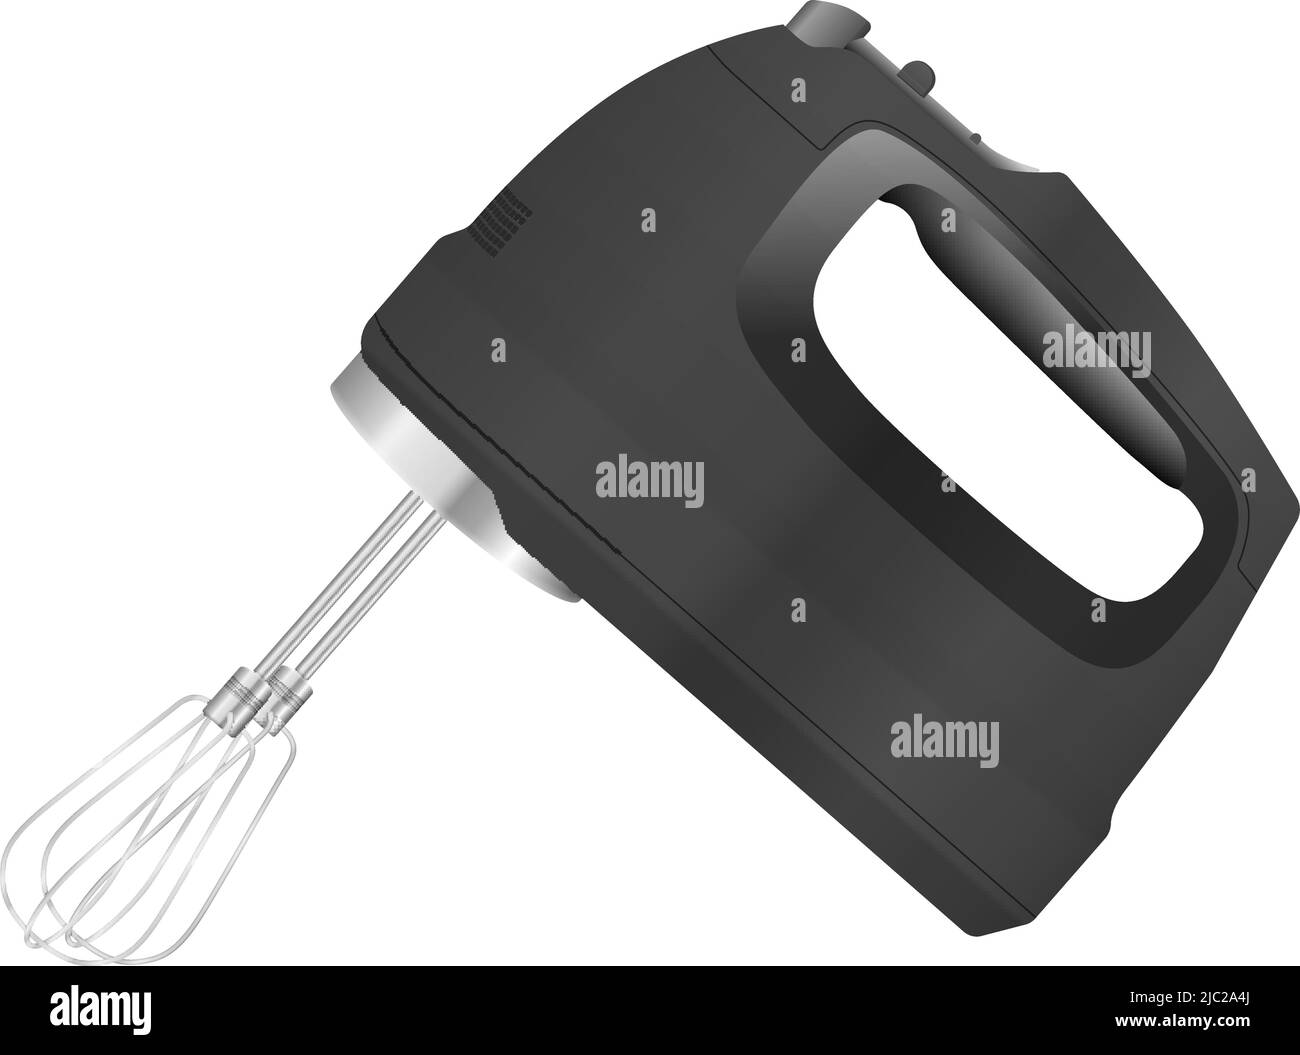 Hand mixer Black and White Stock Photos & Images - Alamy